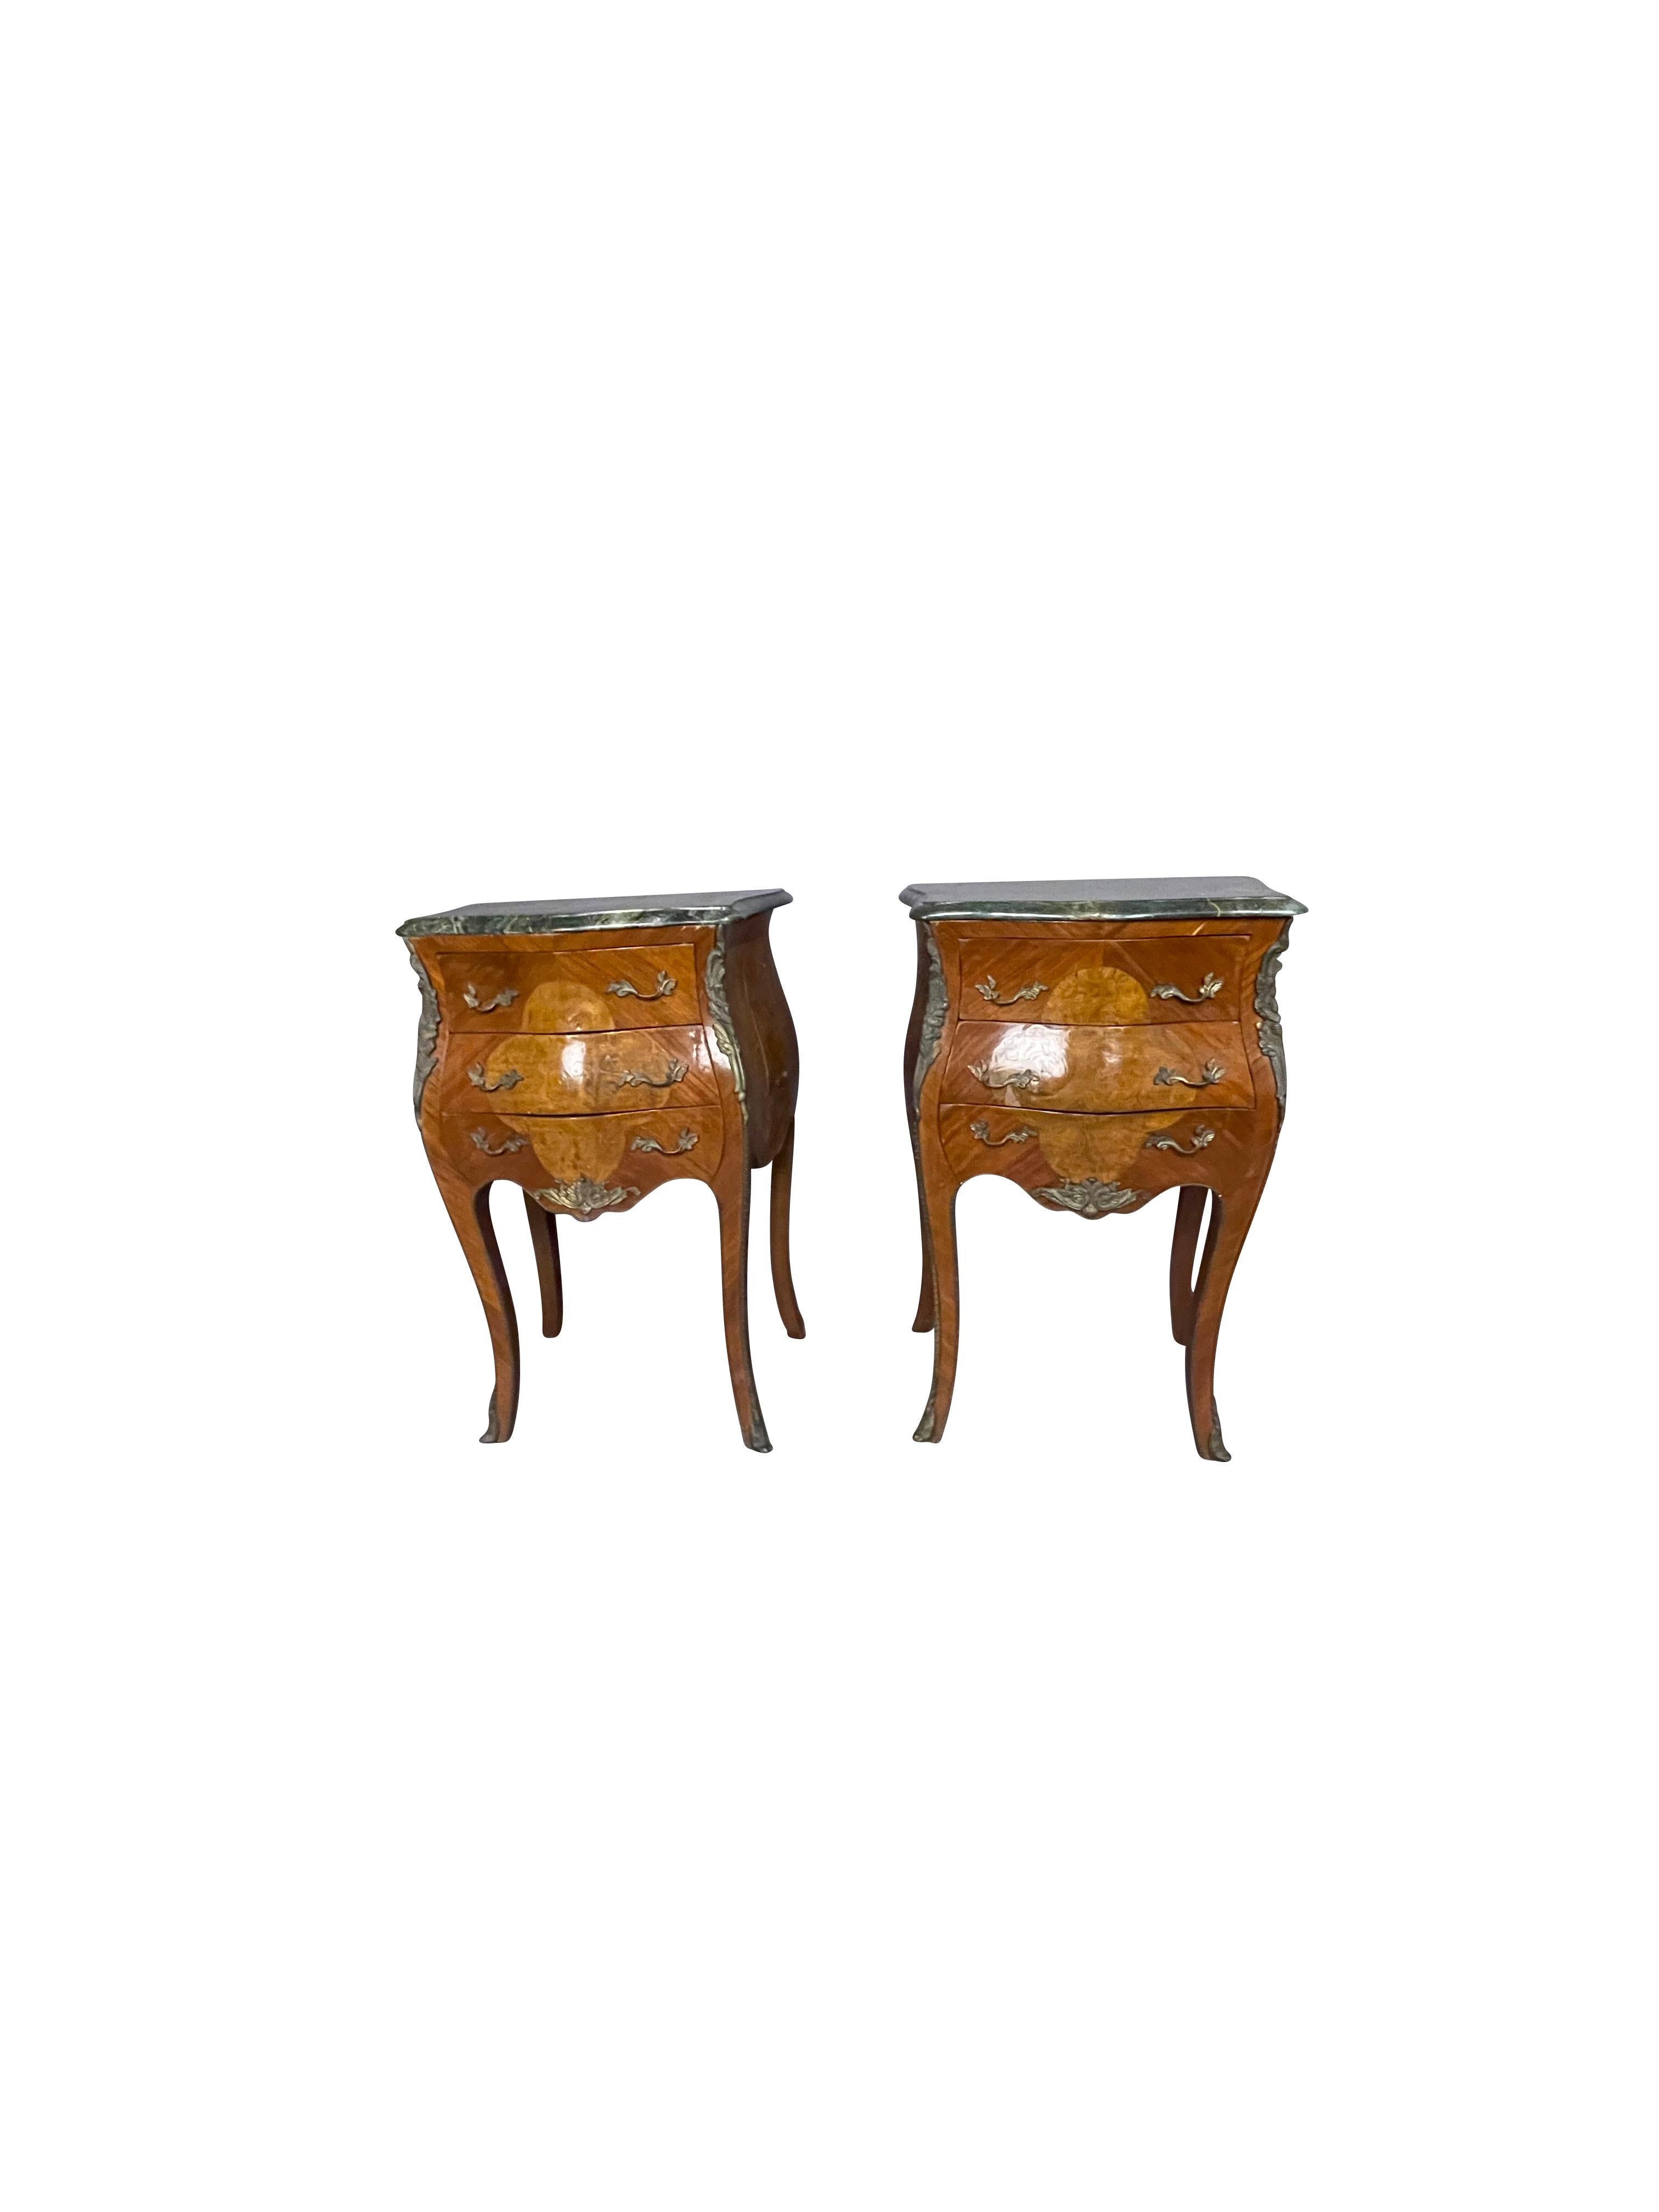 American Pair of Louis XVI Style End Tables with Ormolu Trim and Green Marble Tops